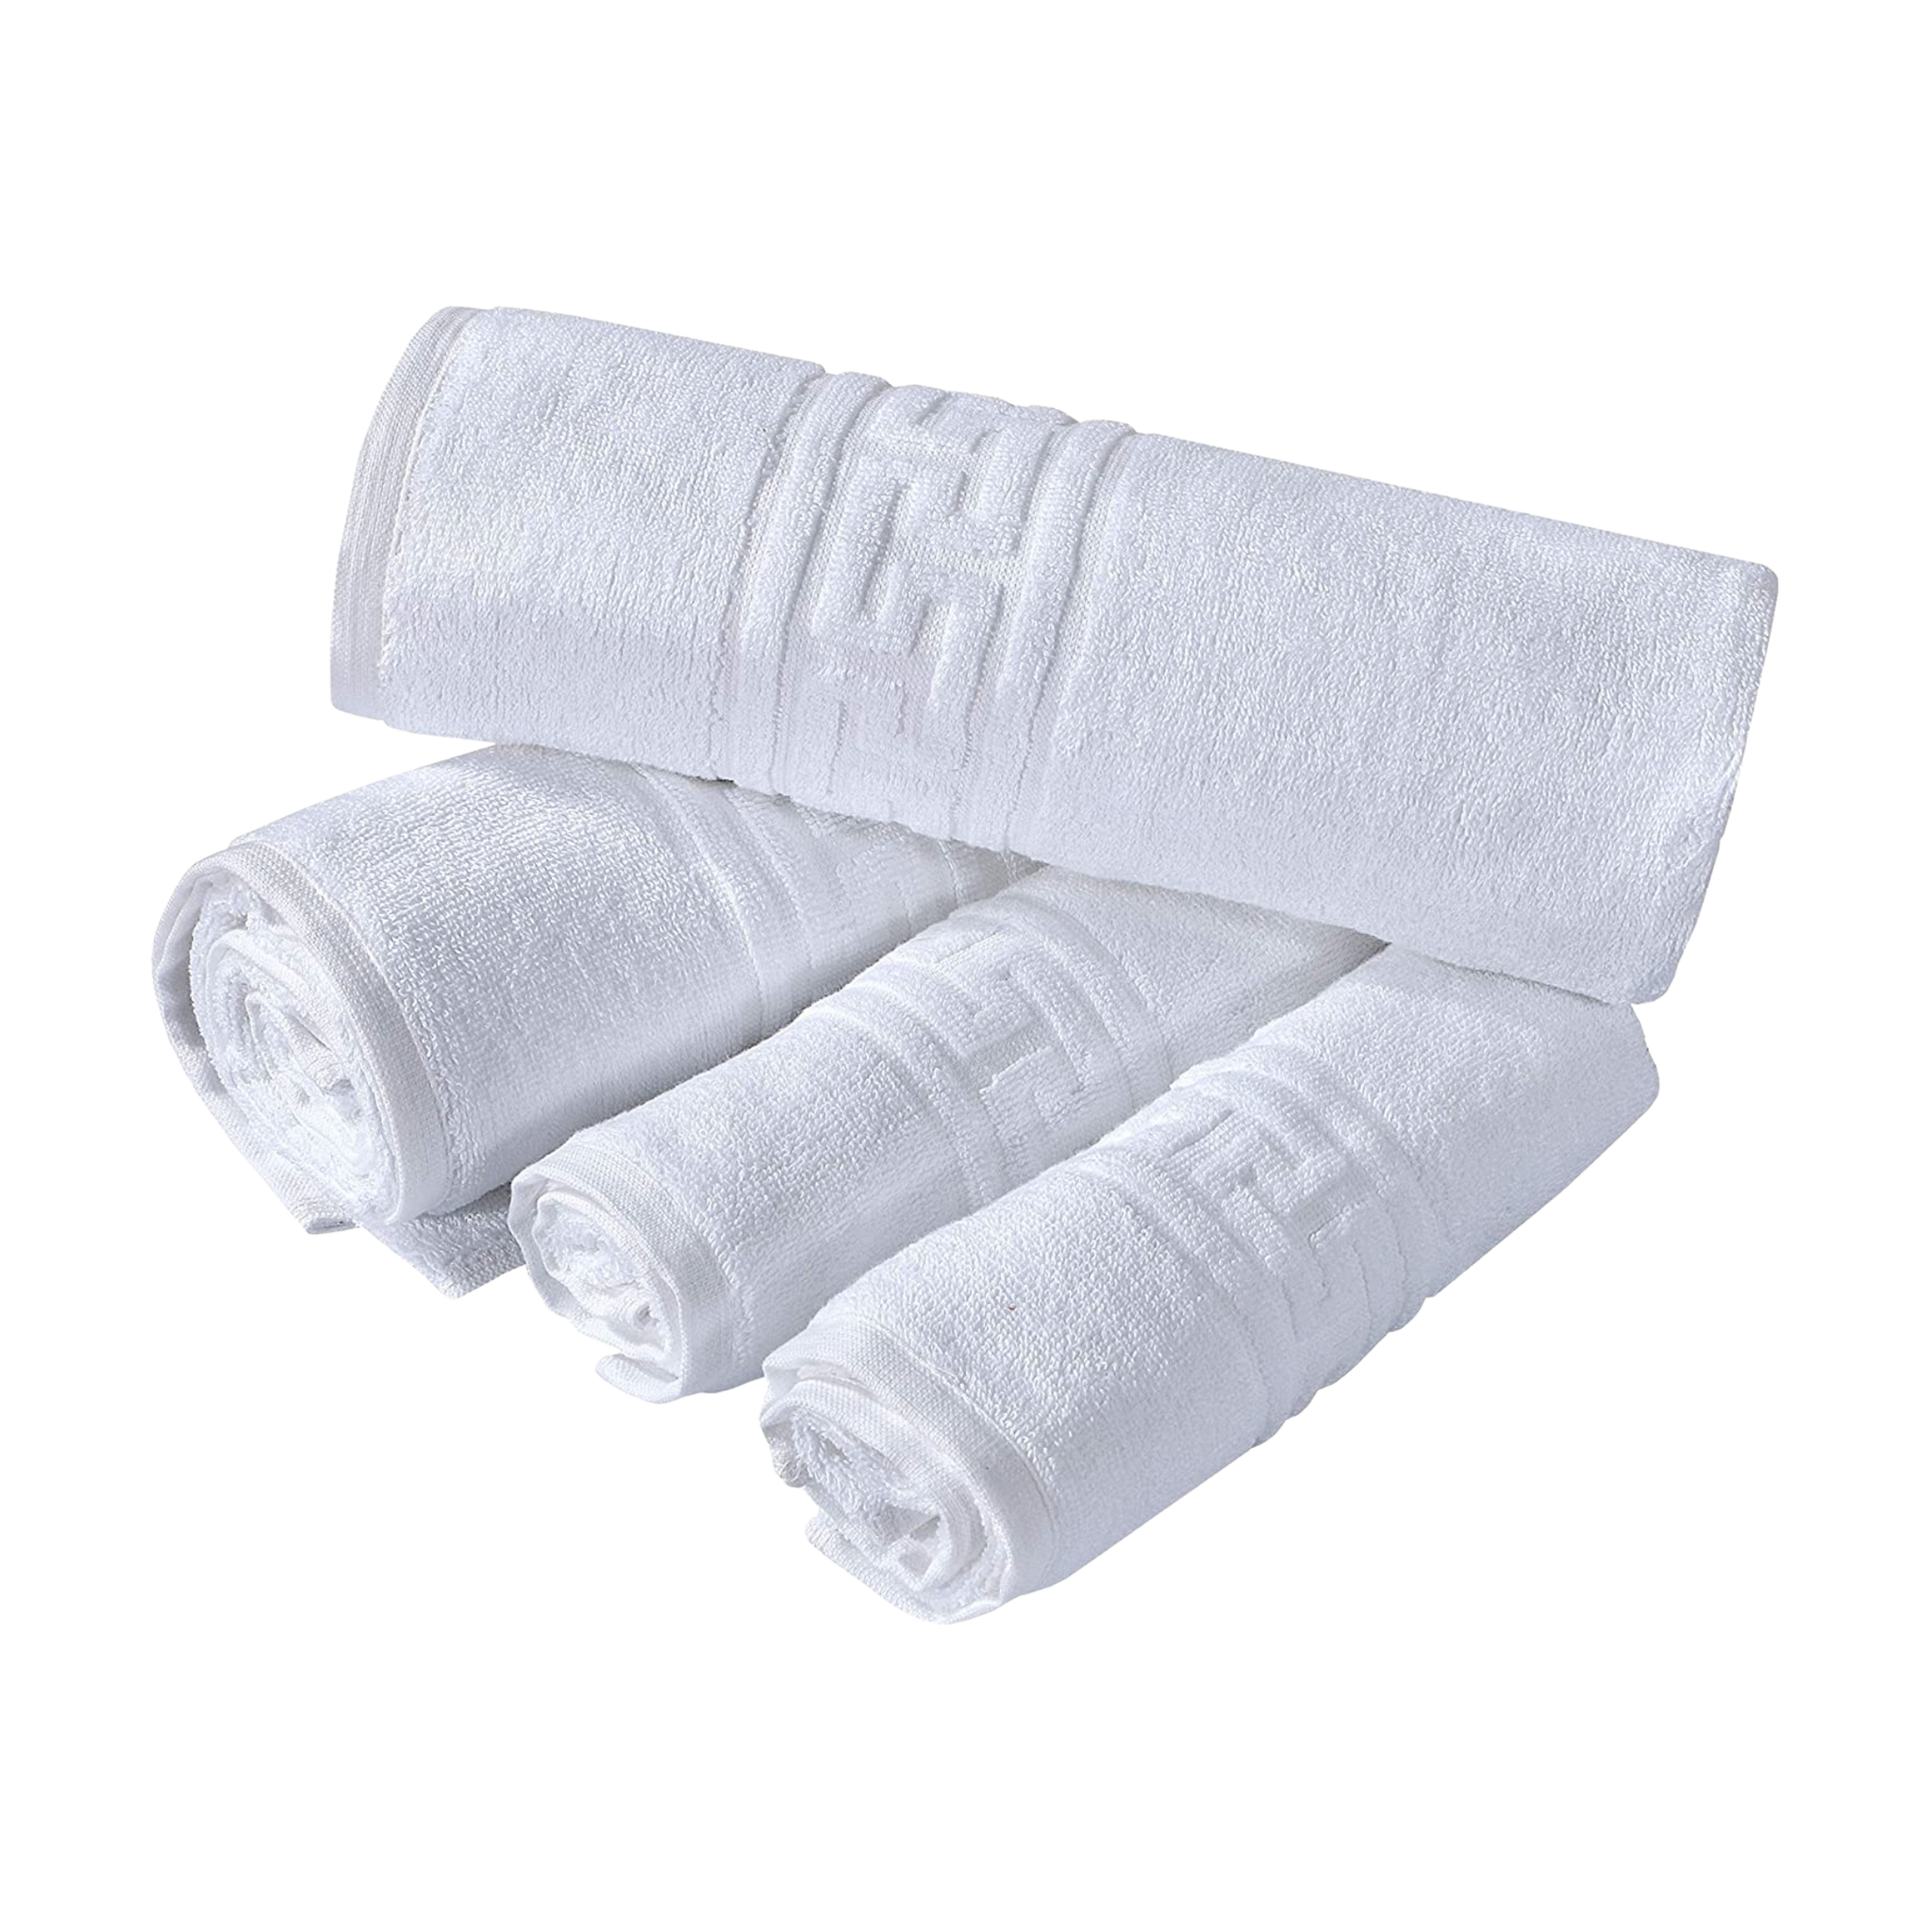 egyptian cotton white flannel for spa pampering and self care